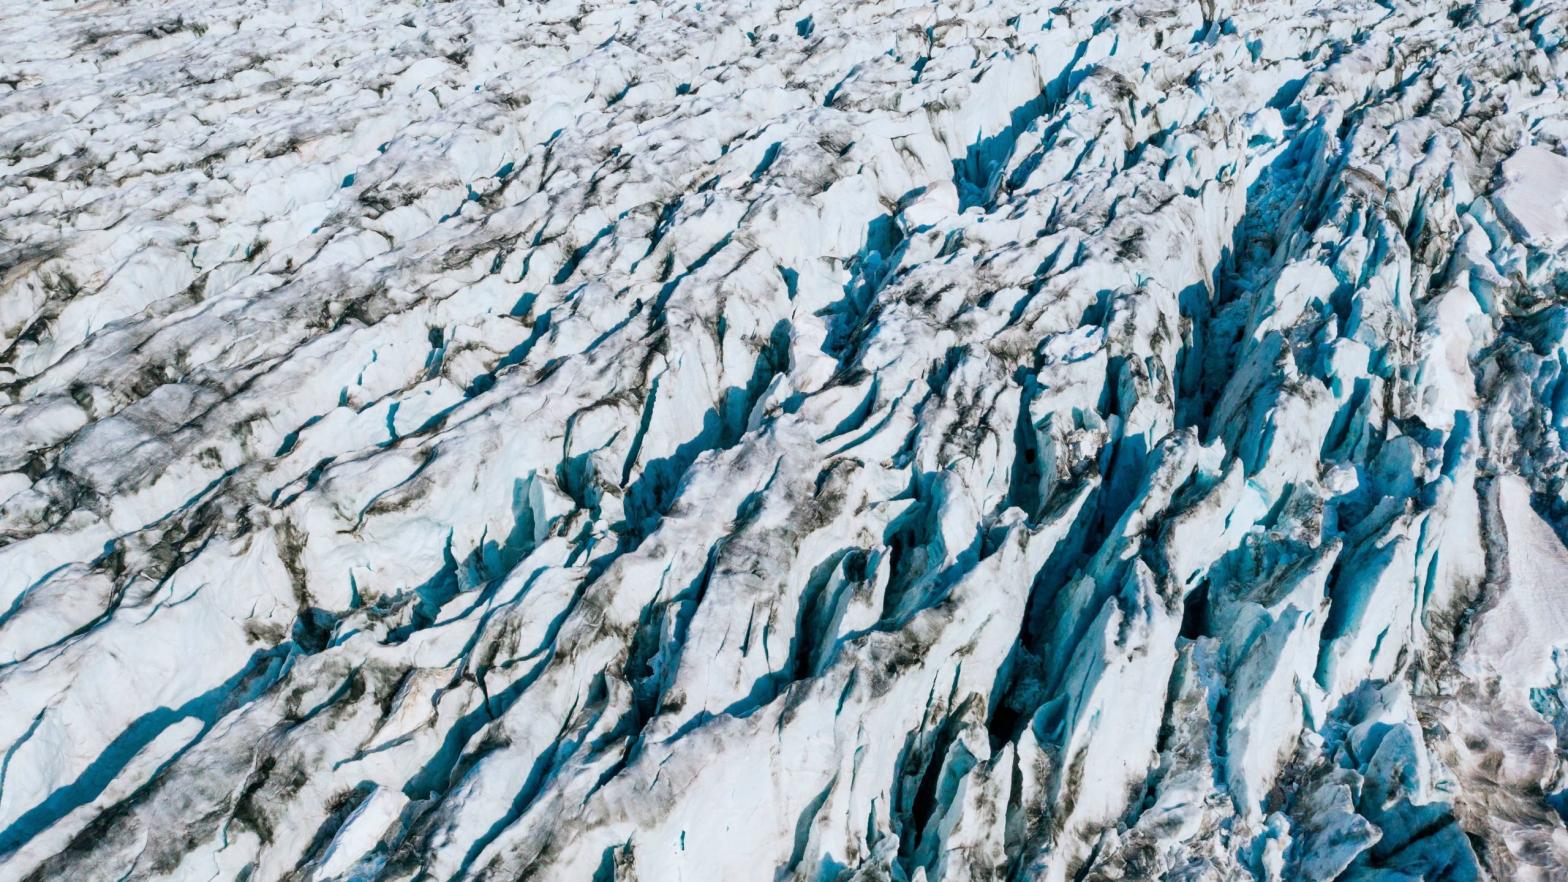 An aerial photo taken in August 2019 shows a view of a Greenland glacier. (Photo: Jonathan Nackstrand, Getty Images)